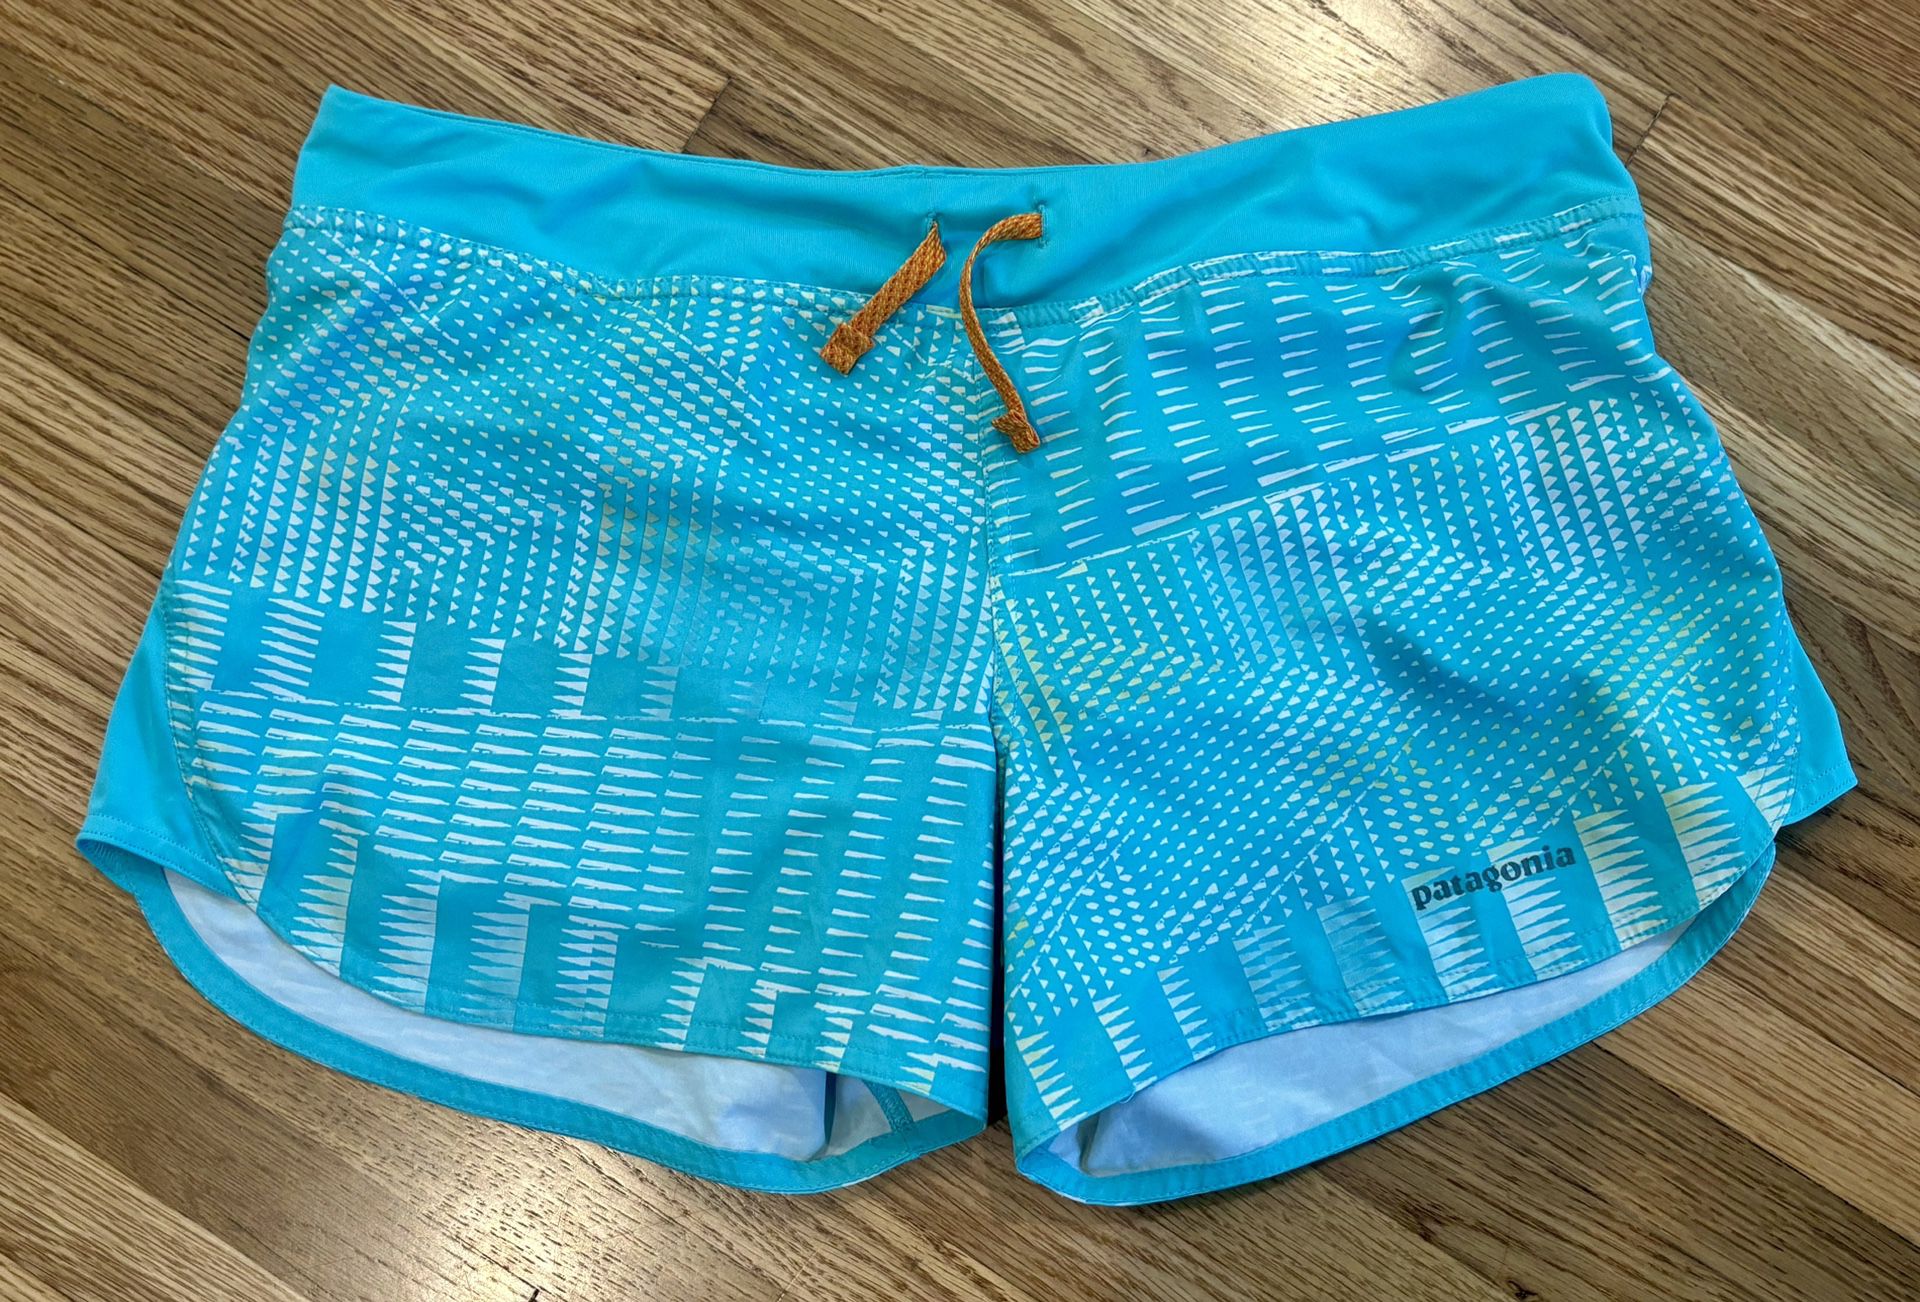 Patagonia Women’s Nine Trails Short. Lined. Size Small